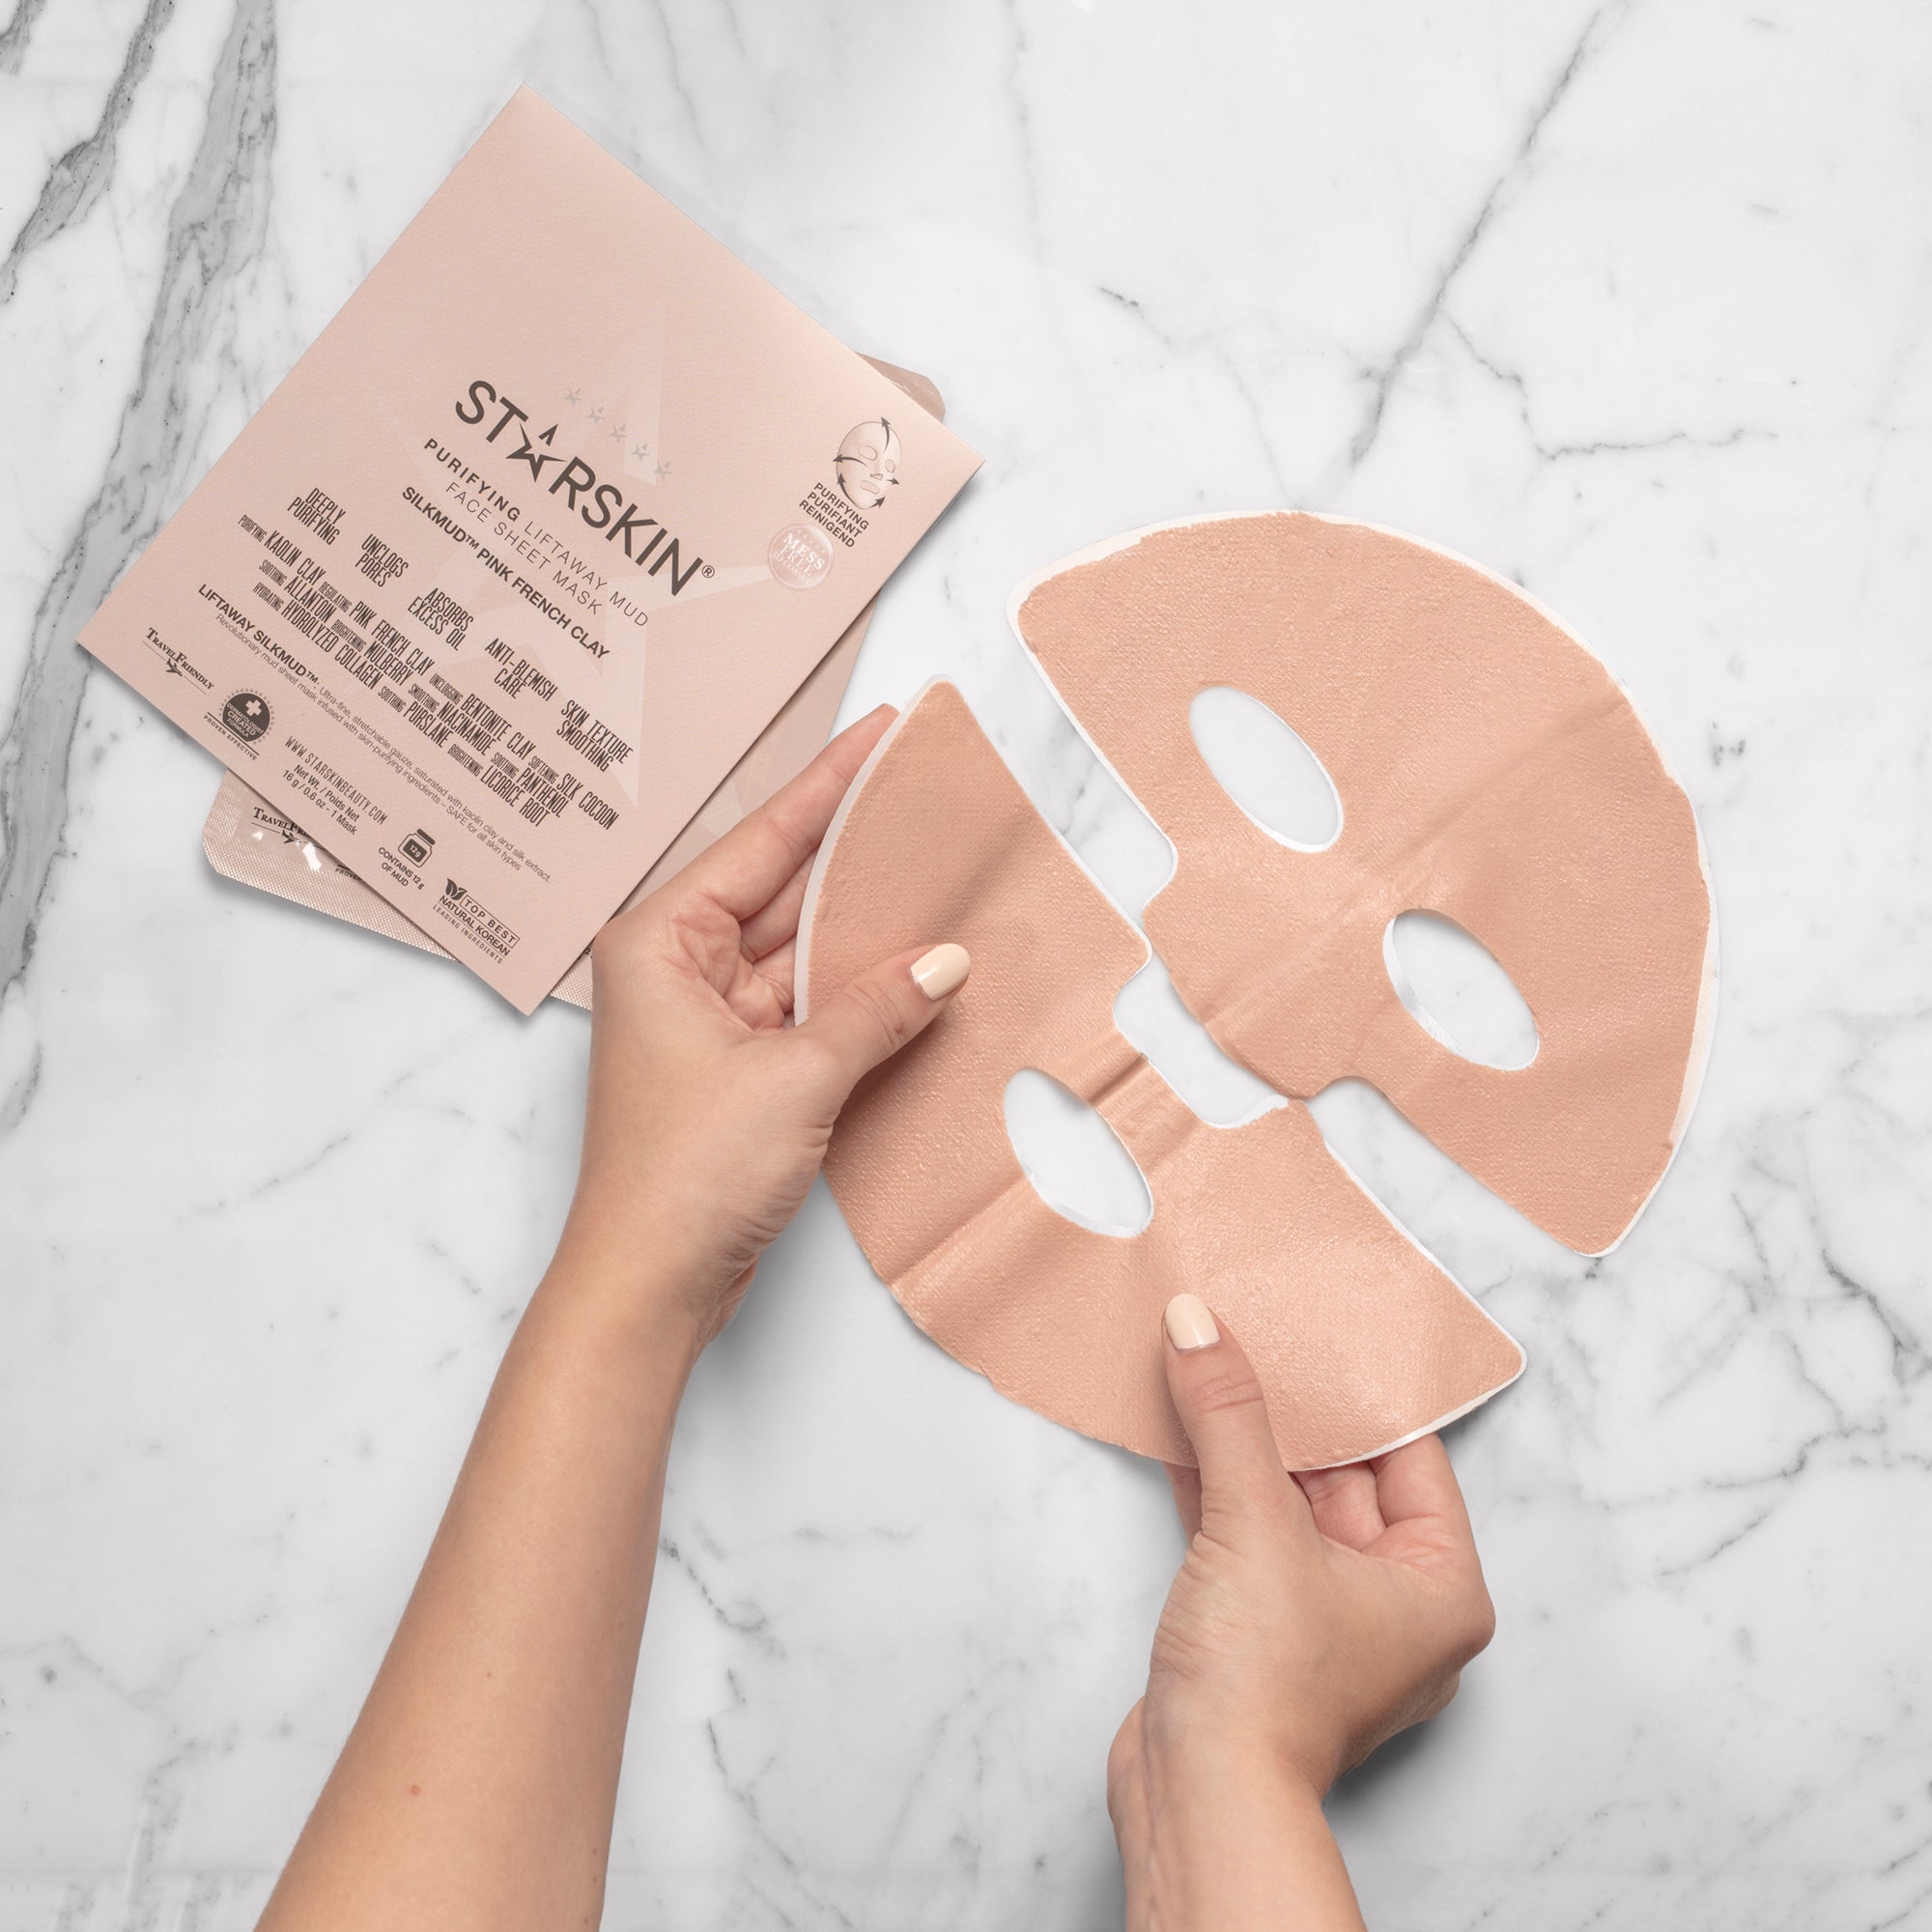 The French Pink Clay mask out of it's package. The mask is being held in someones hands. The image has a marble background